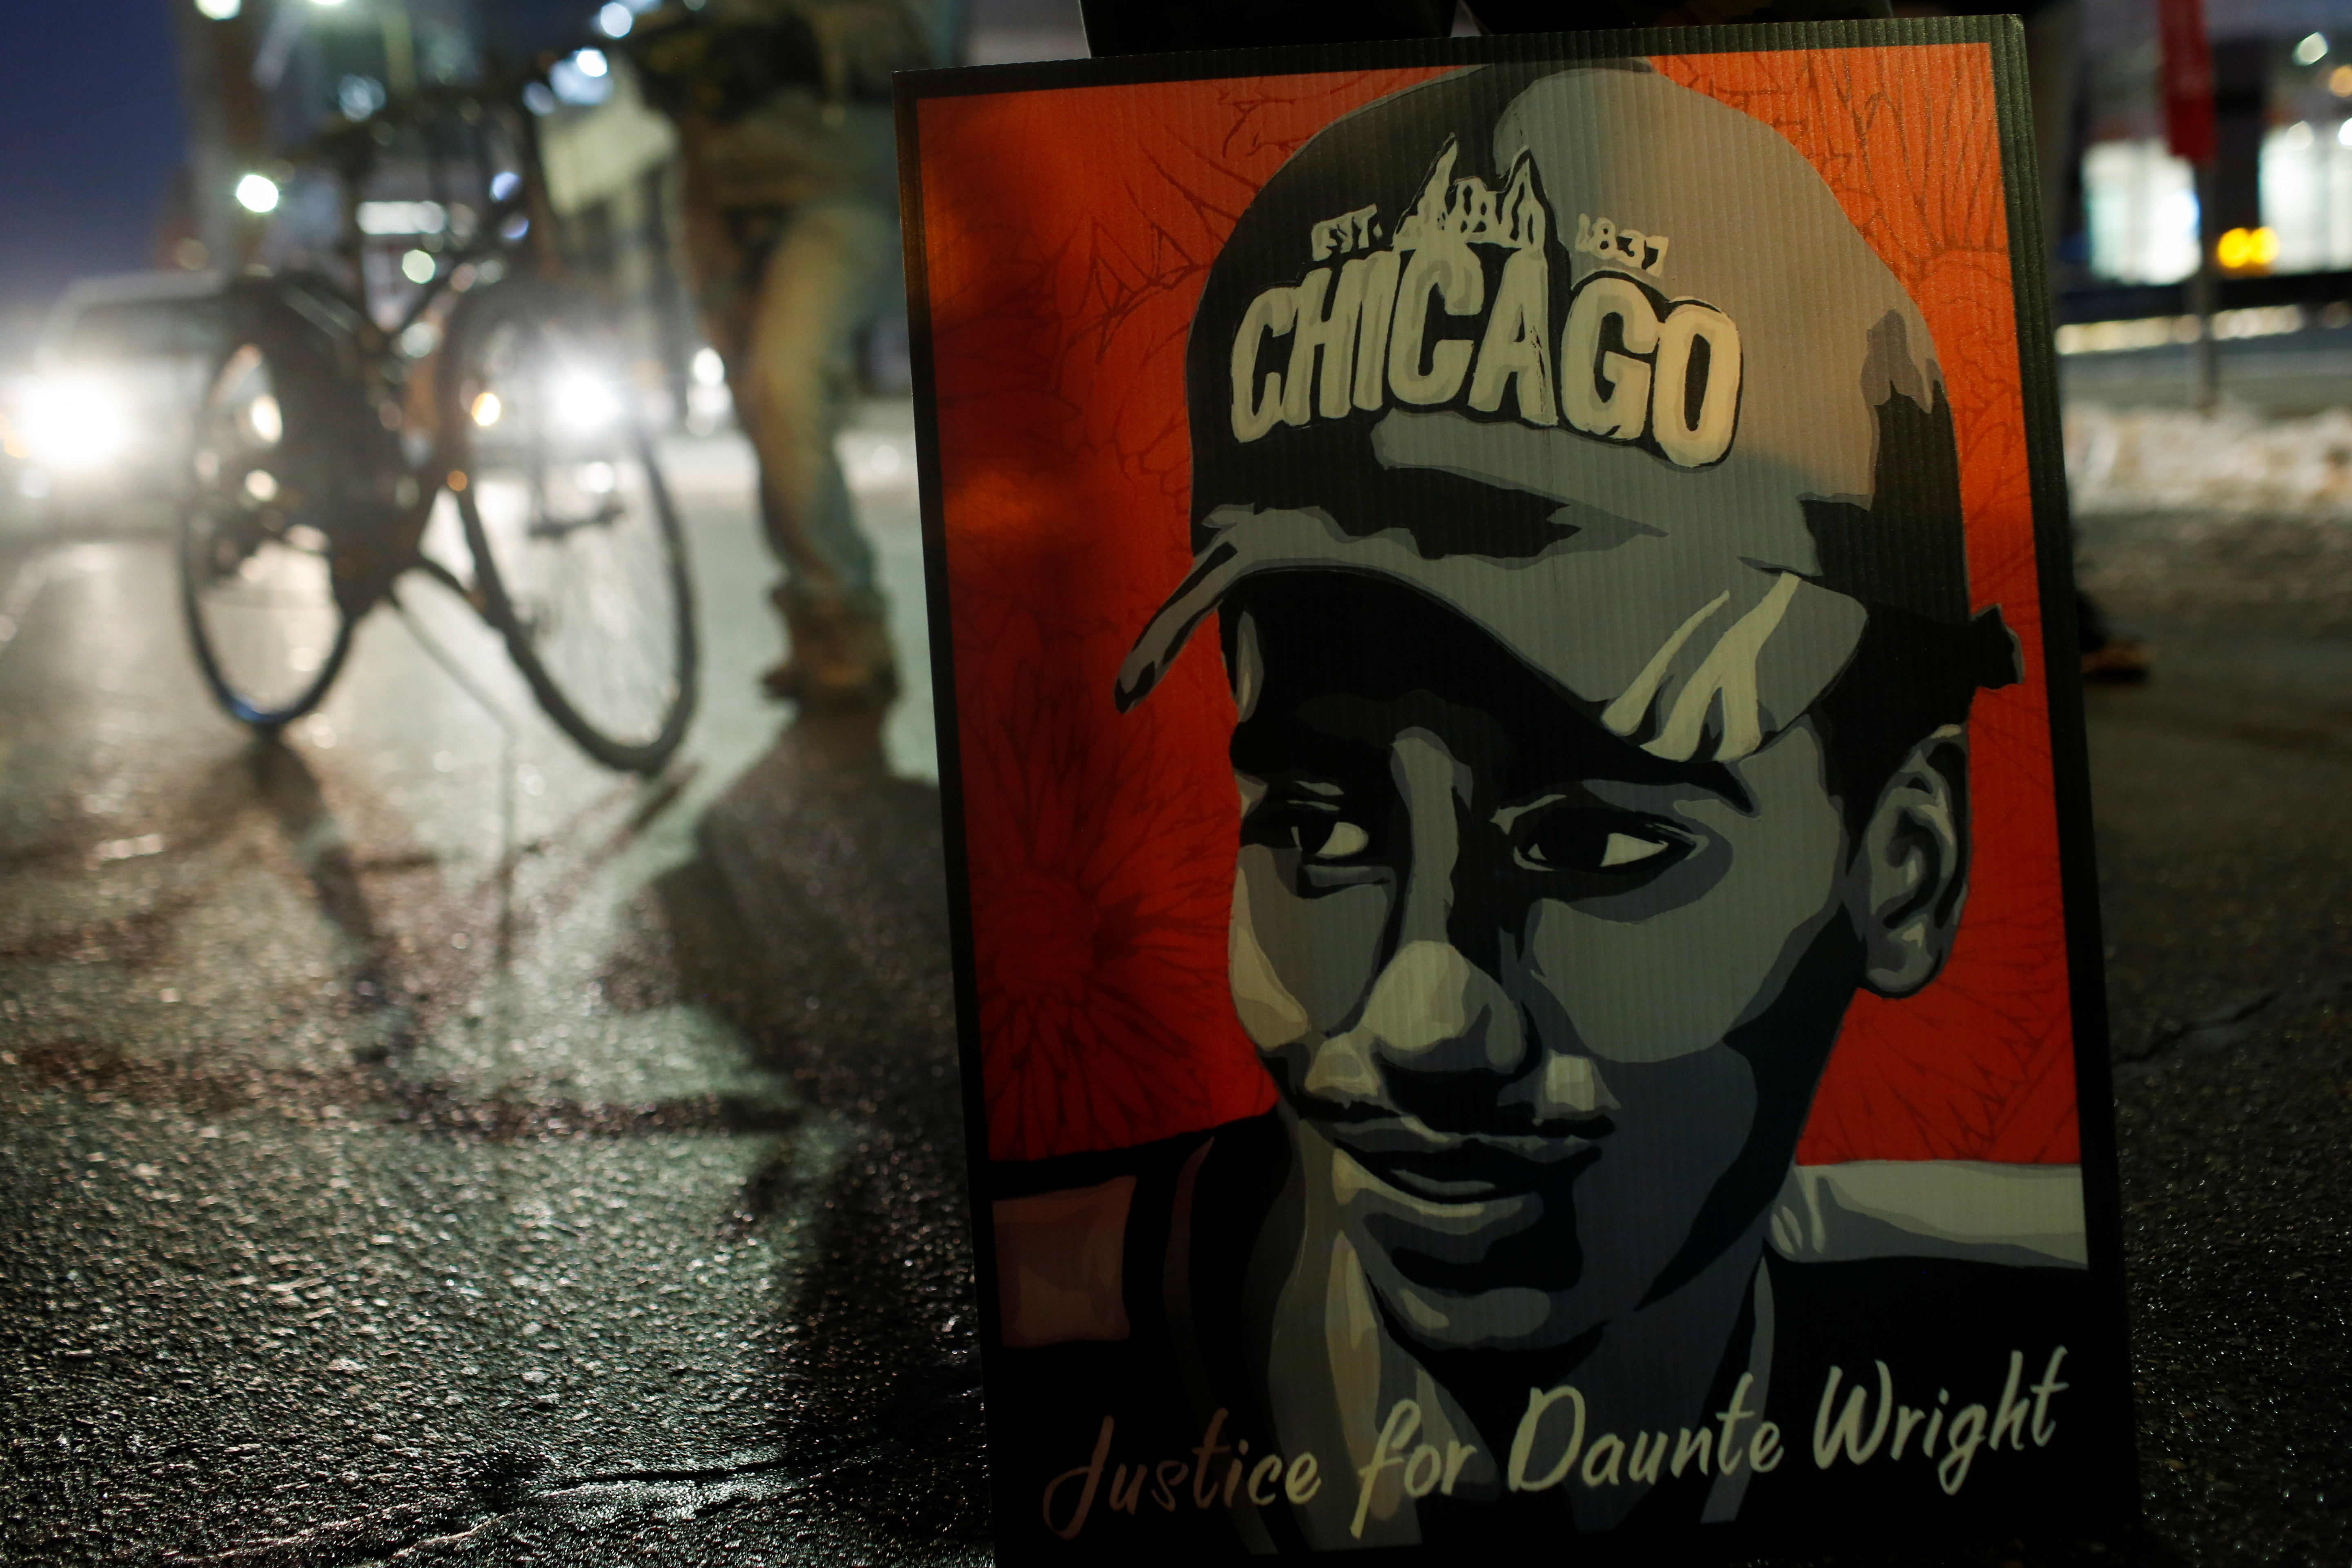 A poster of Daunte Wright is seen during a demonstration in Minneapolis, Minnesota, U.S. December 8, 2021.  REUTERS/Nicole Neri